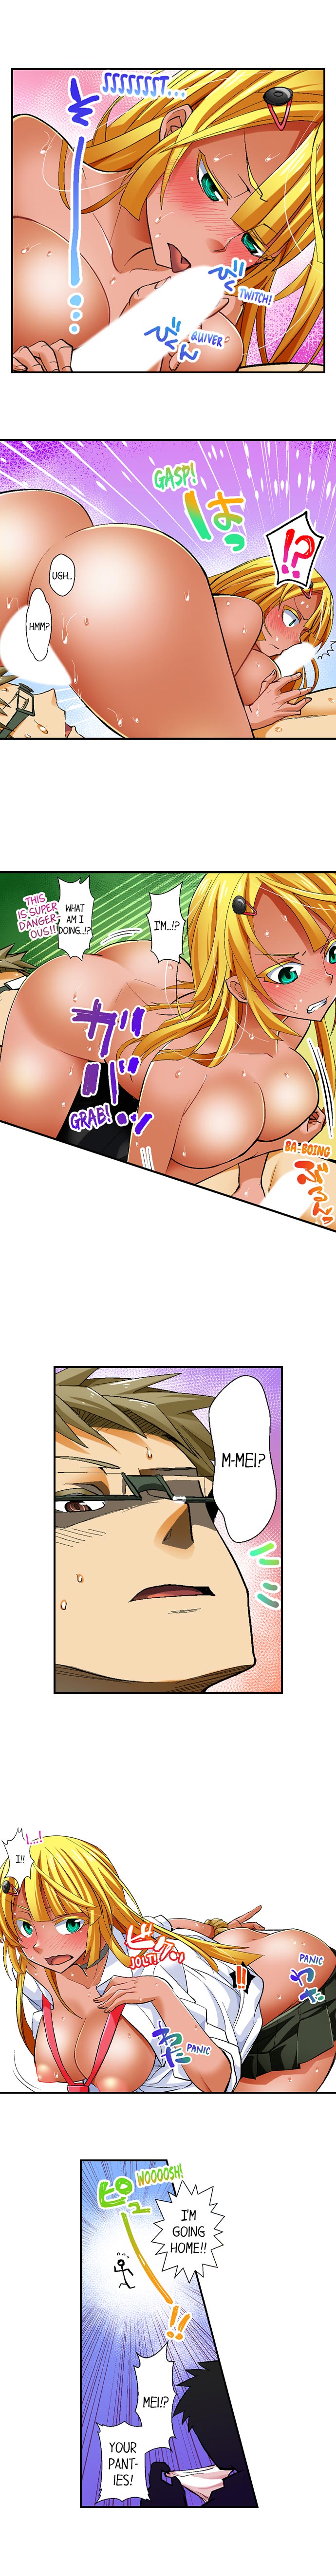 Sex With a Tanned Girl in a Bathhouse - Chapter 7 Page 2